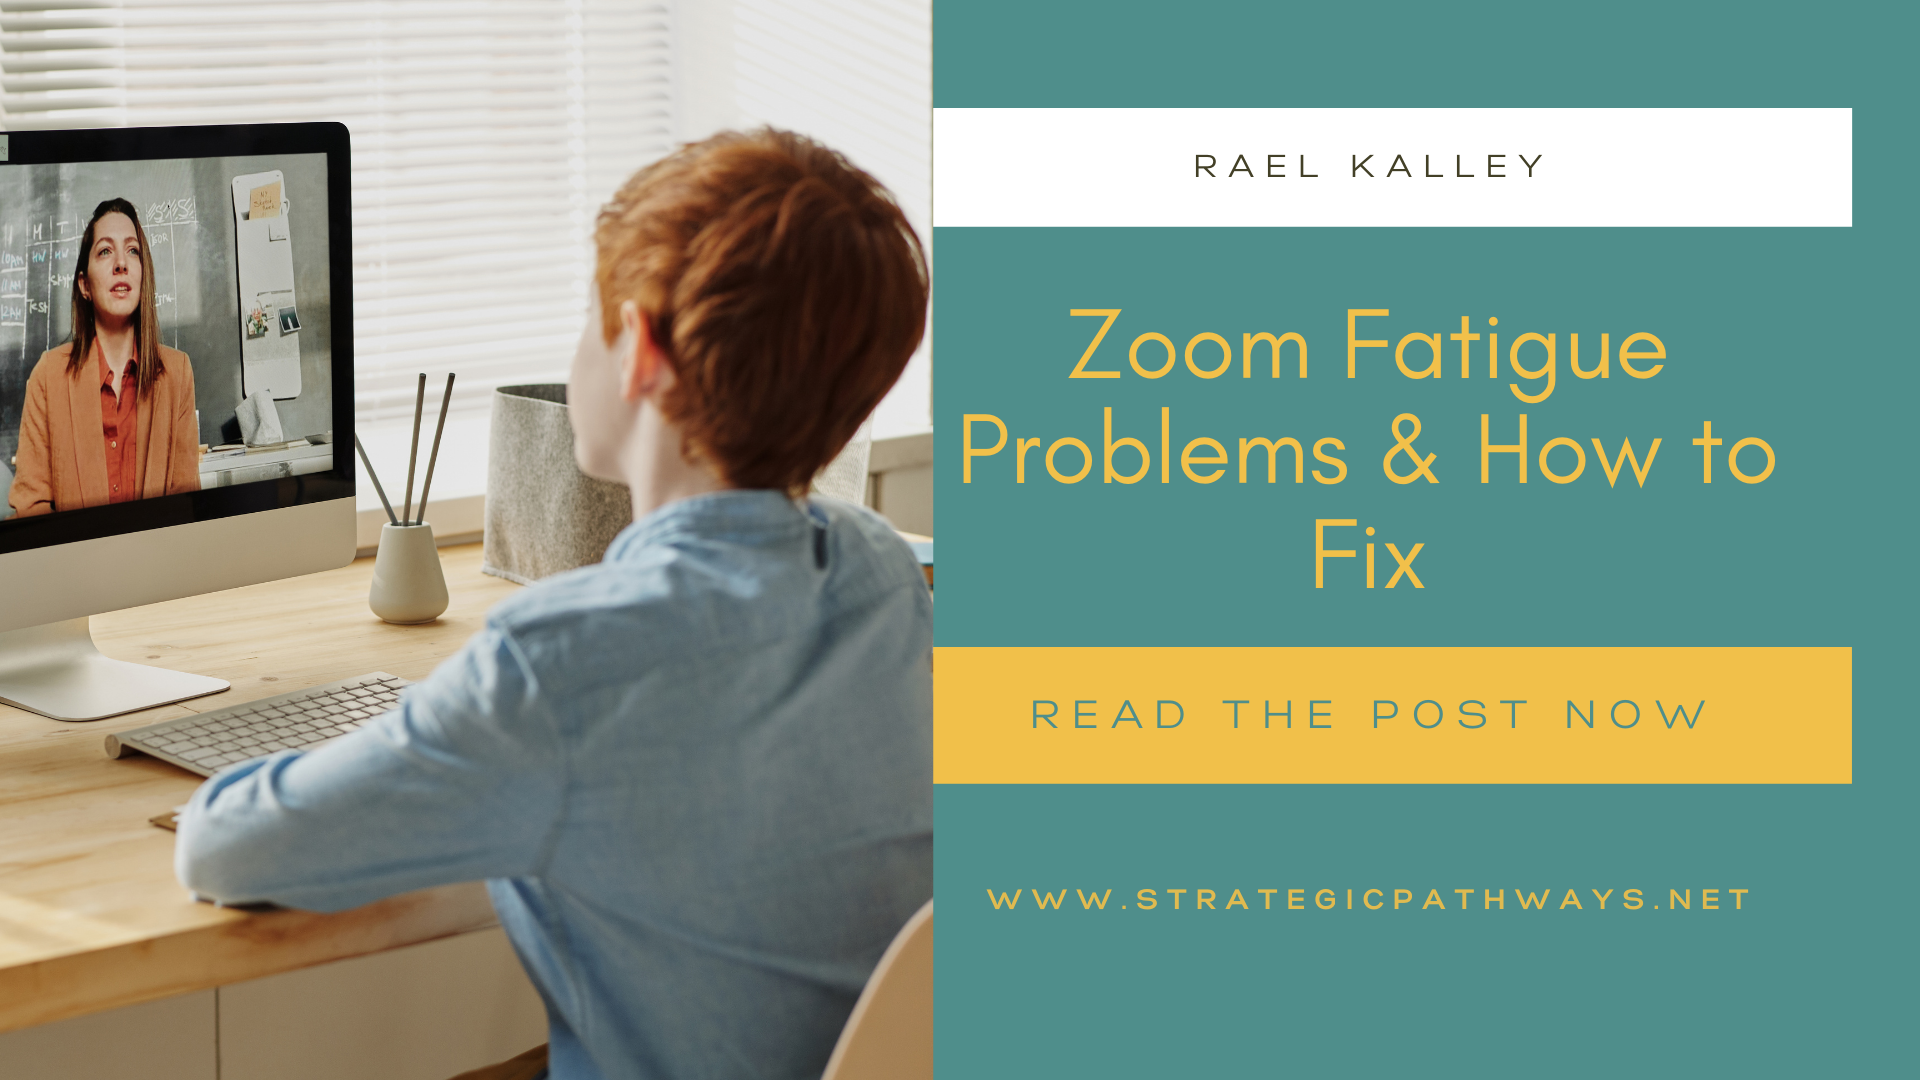 Text says "Zoom Fatigue Problems & How to Fix" and a woman assisting a zoom call